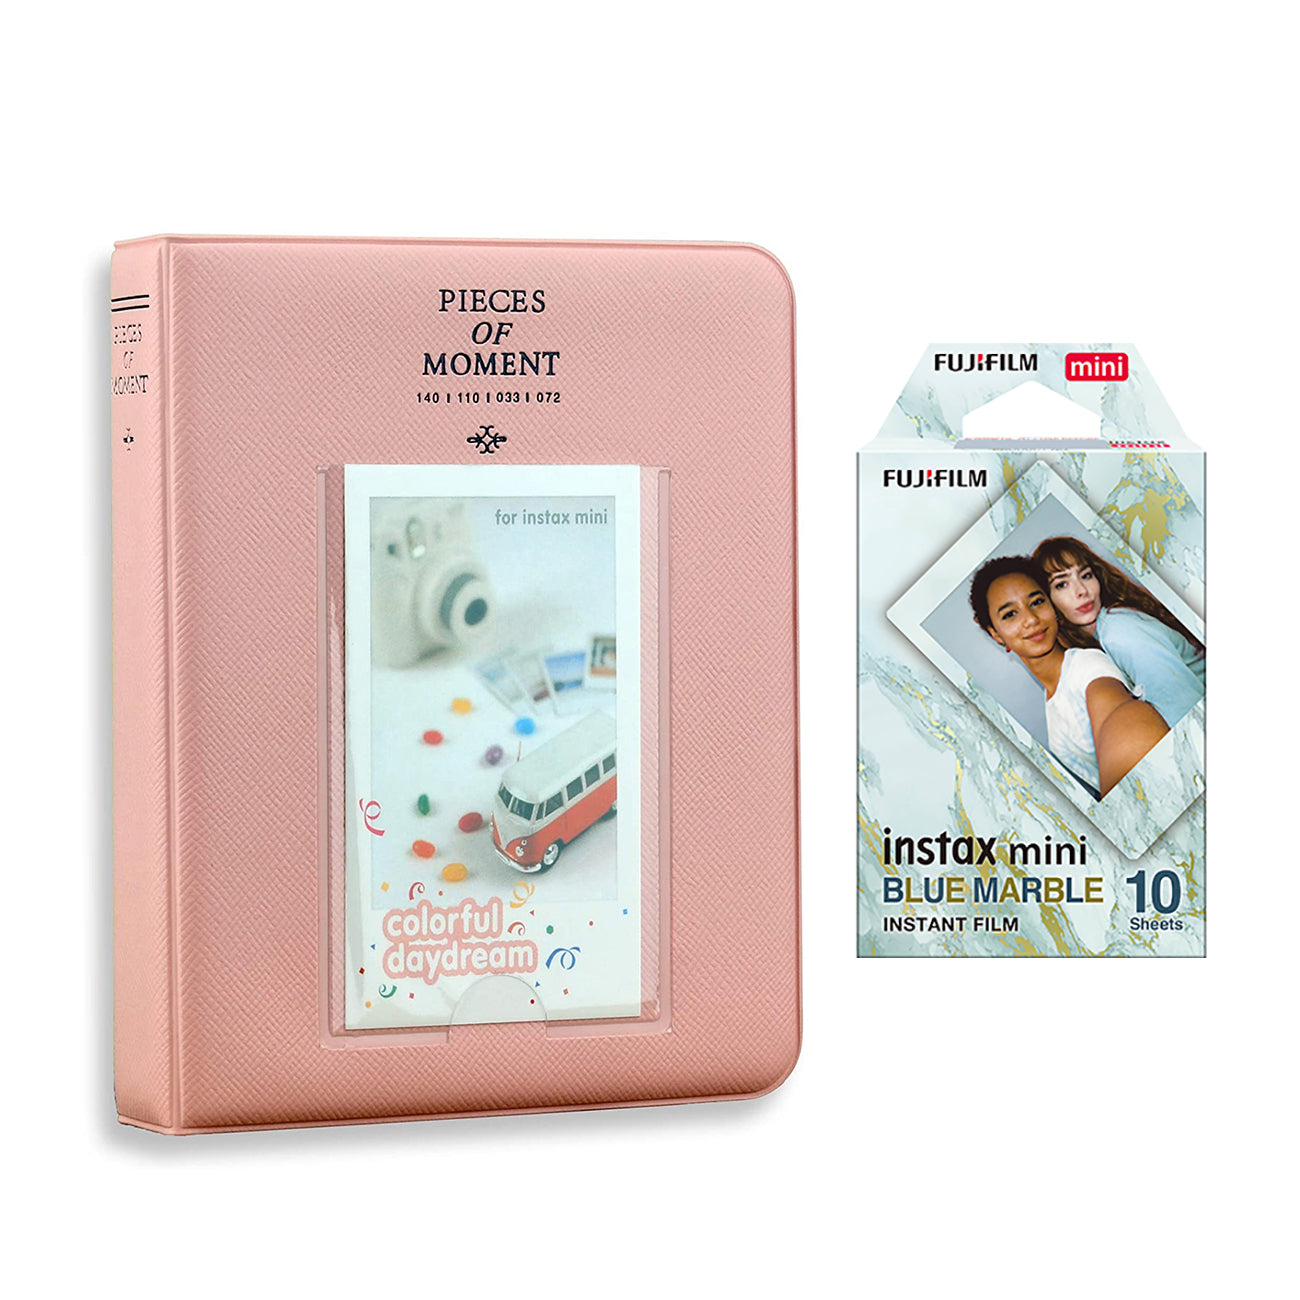 Fujifilm Instax Mini 10X1 blue marble Instant Film with Instax Time Photo Album 64 Sheets (blush pink)